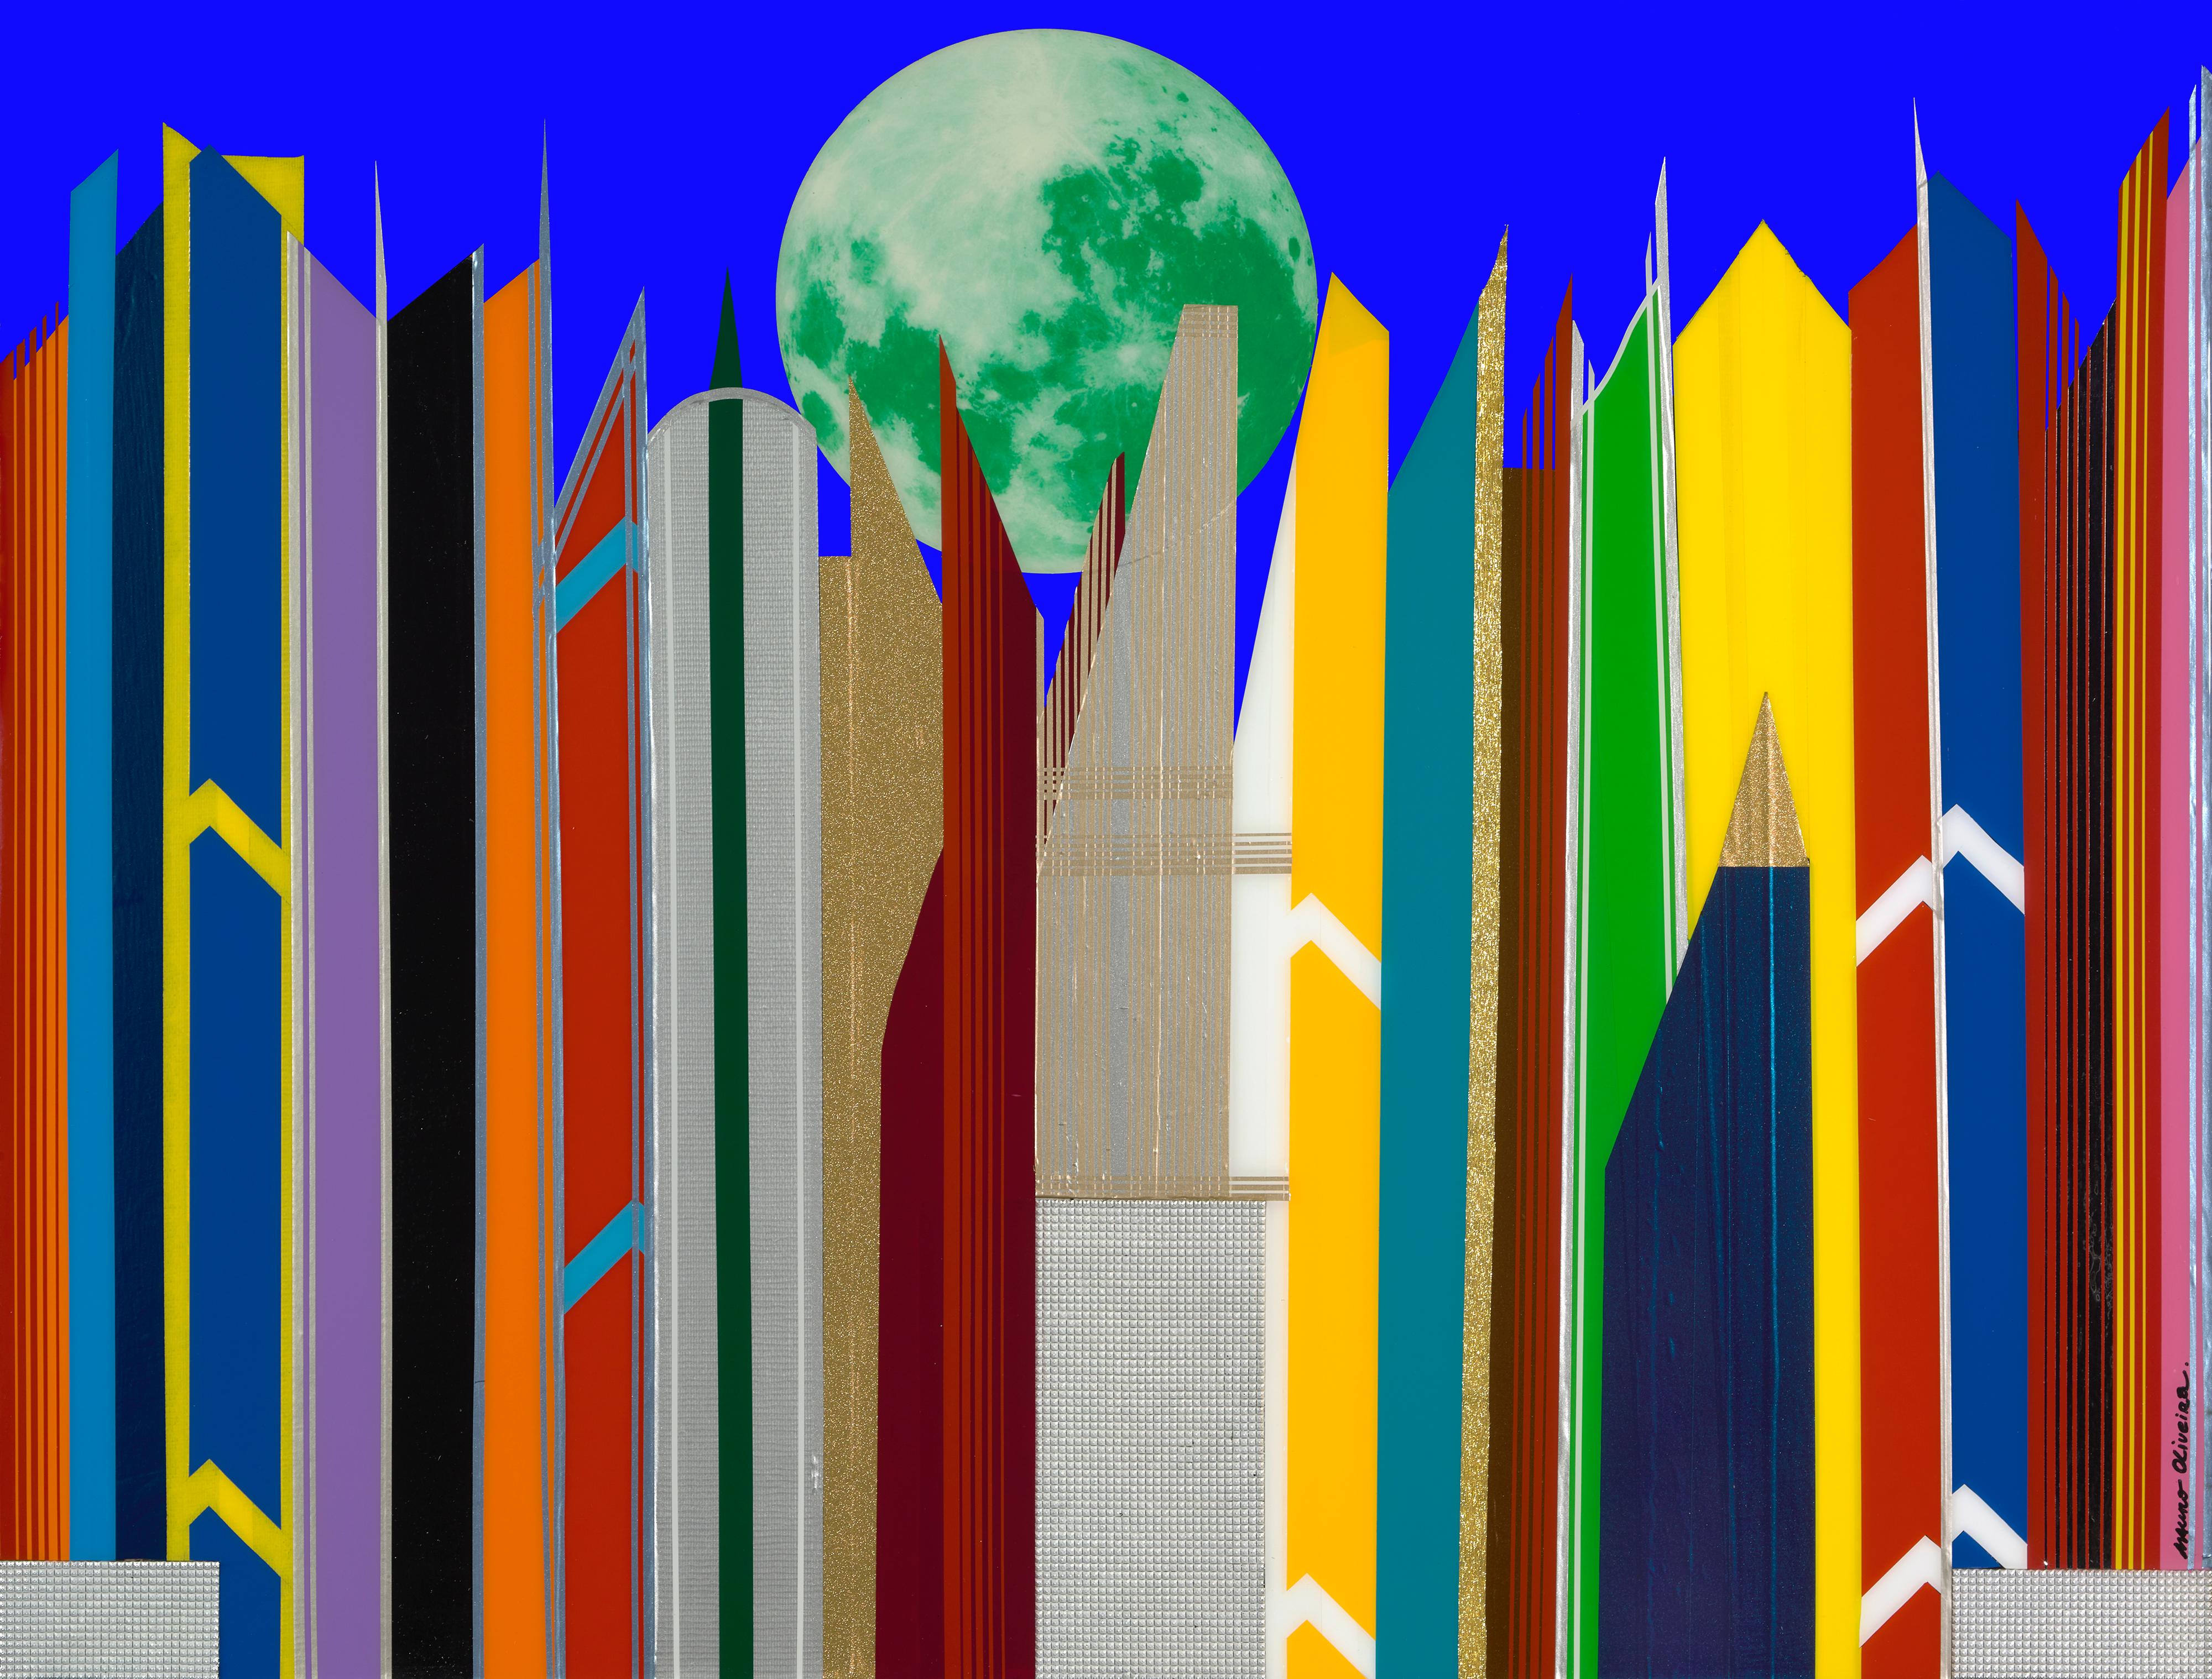 This Futuristica skyline series by Mauro Oliveira has been a bestseller for the past 10 years. 
All pieces of the series are one of a kind, representing well known cities such as New York, Los Angeles, Dubai, London, Rio de Janeiro, as well as